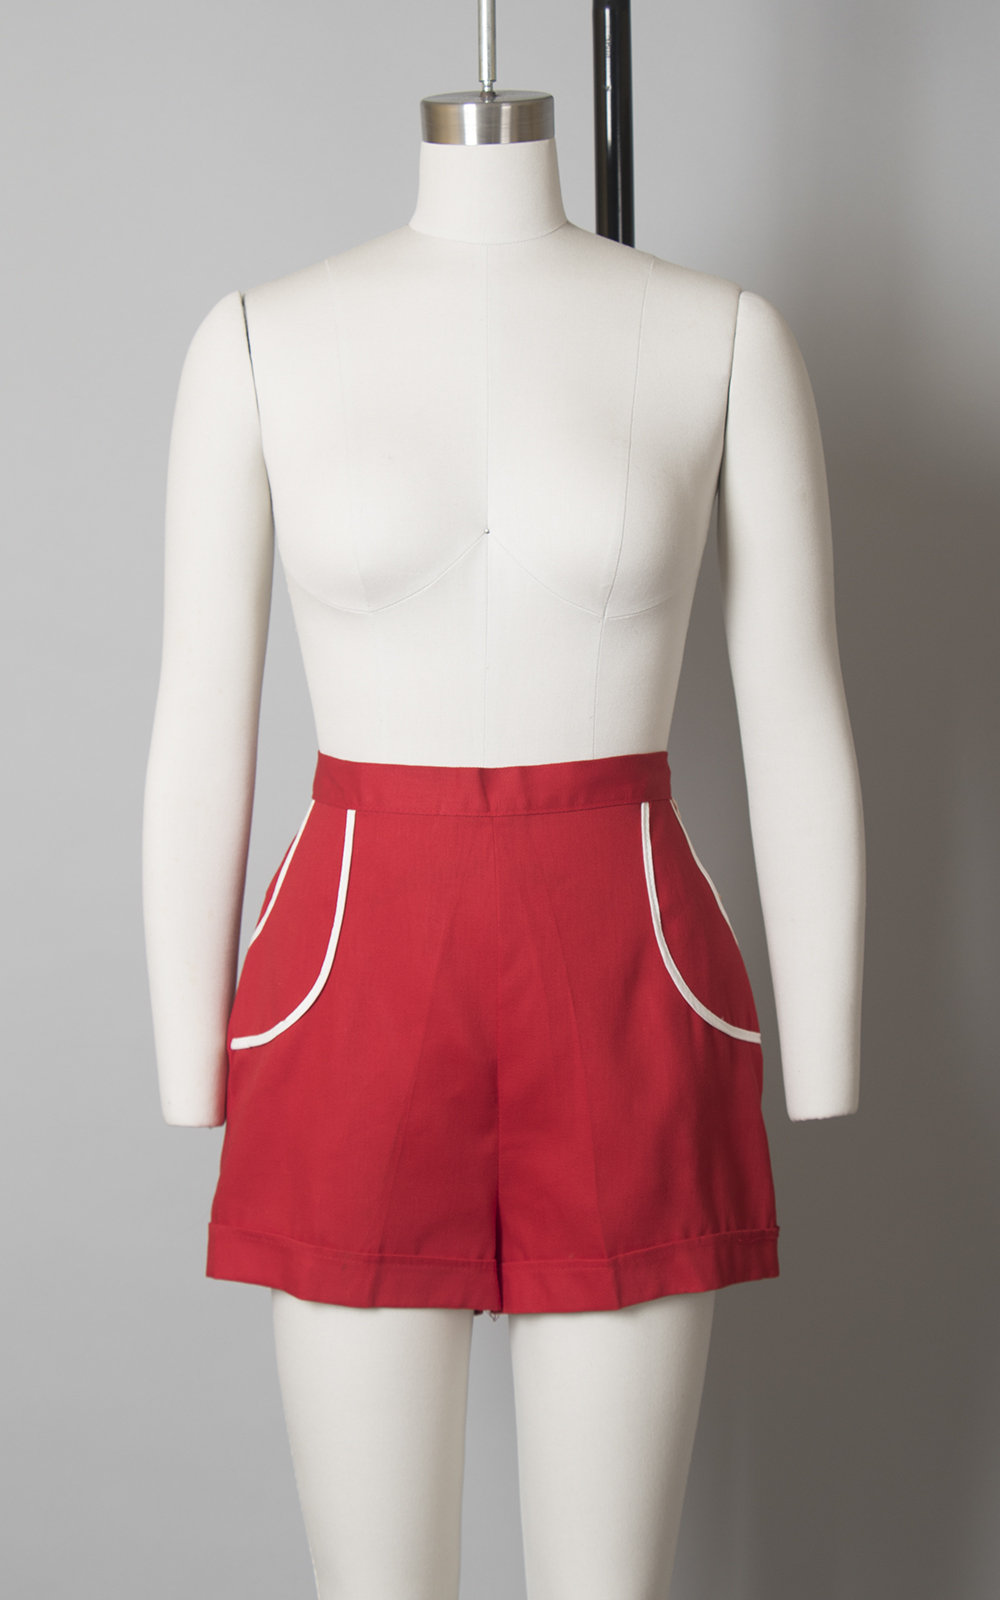 Vintage 1940s Shorts | 40s DEADSTOCK Red Cotton High Waisted Summer Sportswear Shorts w/ Pockets (small)